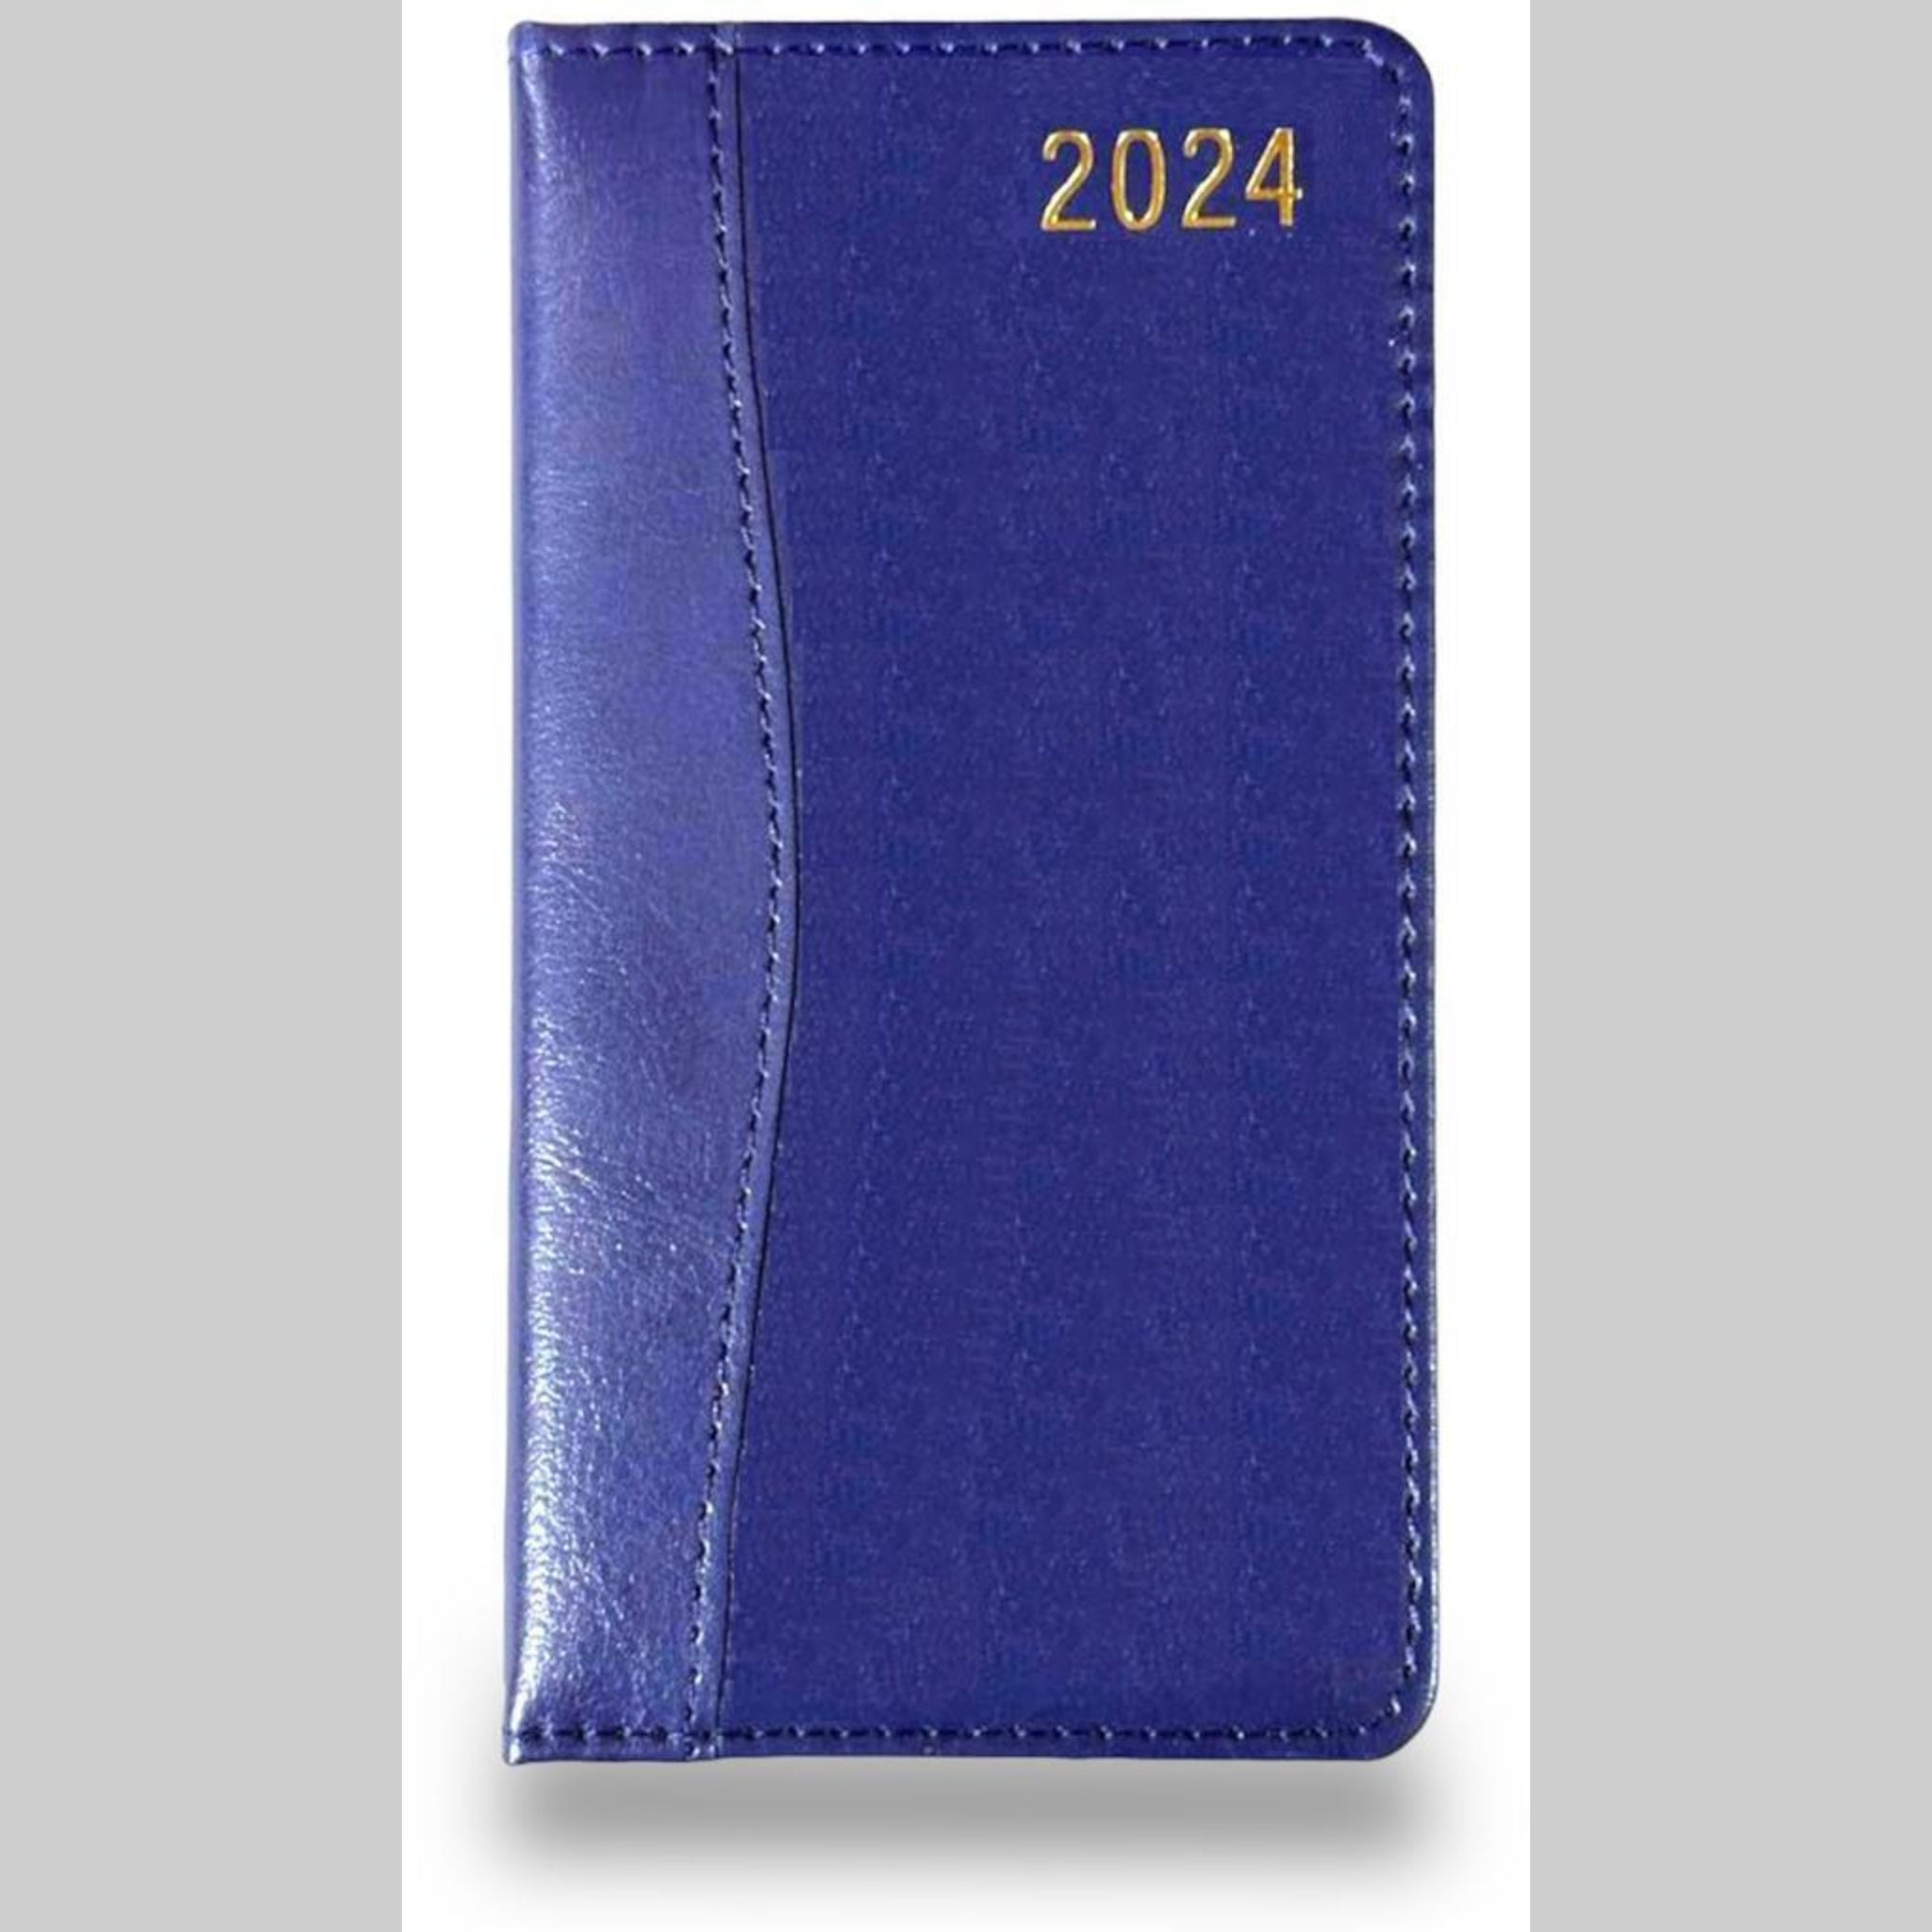 Beclen Harp 2024 Slim Week To View/WTV D-Range Executive Luxury Personalized Diary With Soft Leather Cover